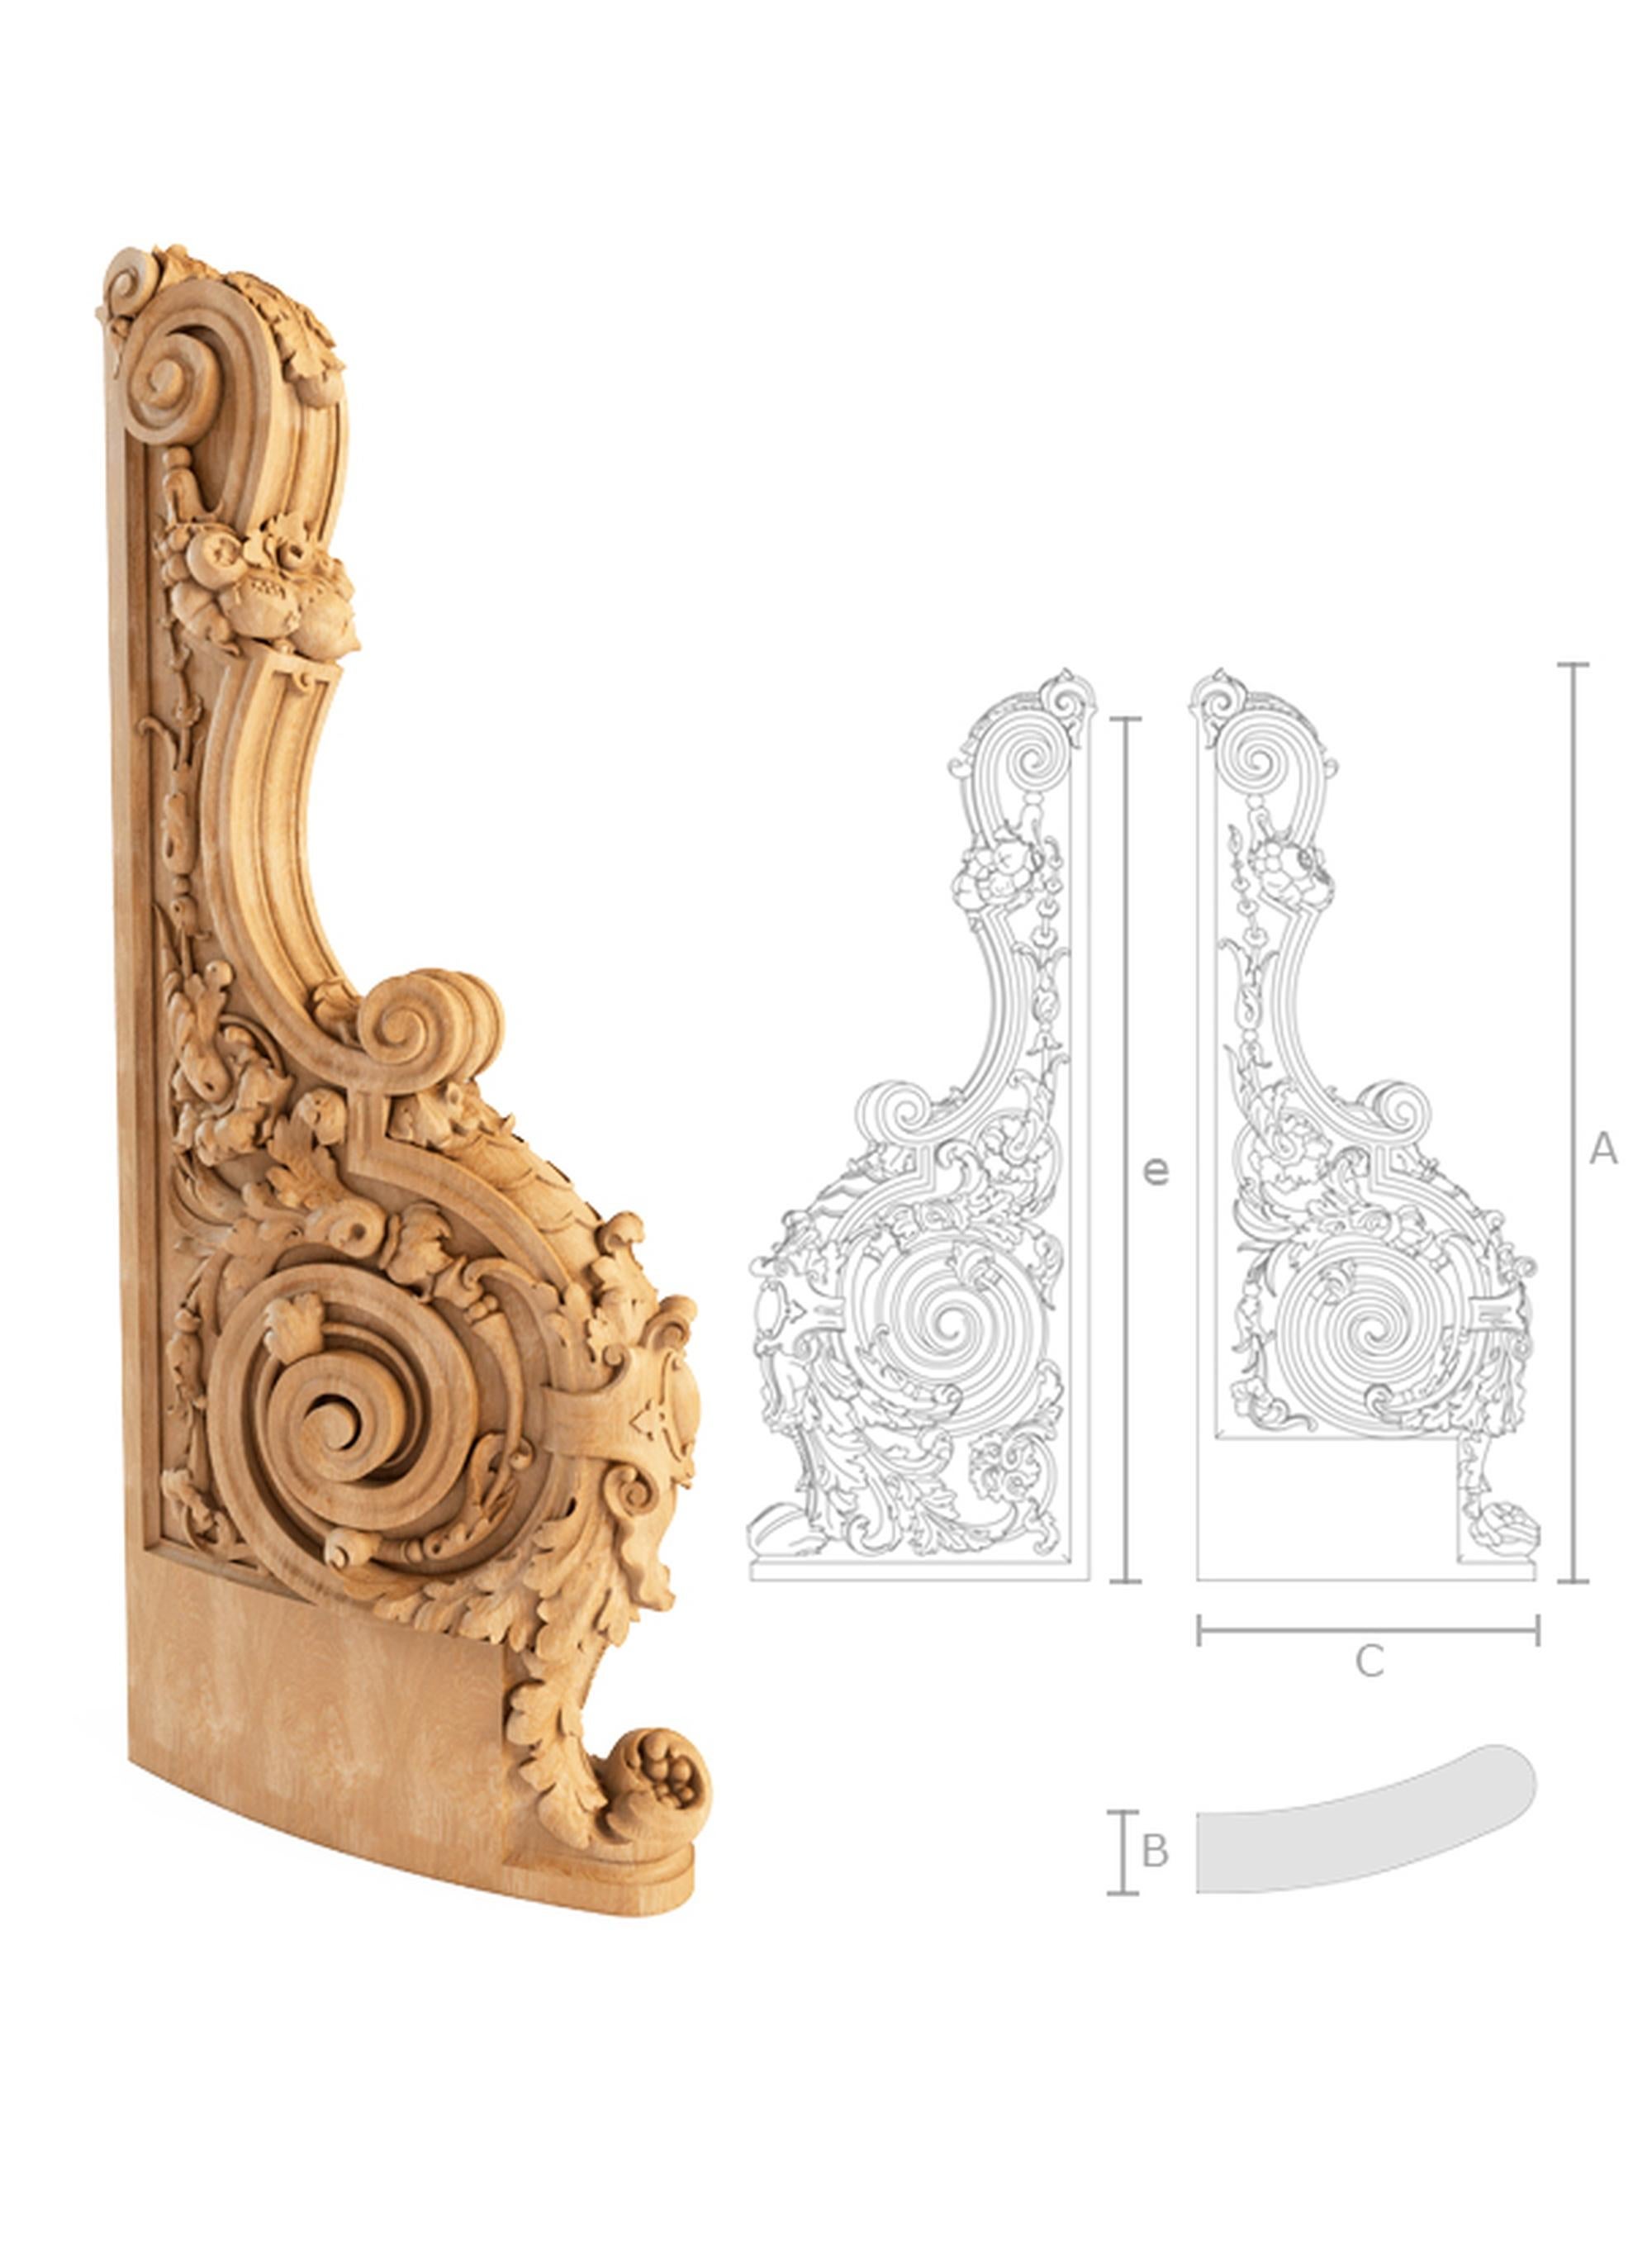 Unfinished high quality carved staircase pillar from oak or beech of your choice.

>> SKU: L-107L

>> Dimensions (A x B x C x e):

- 50.51